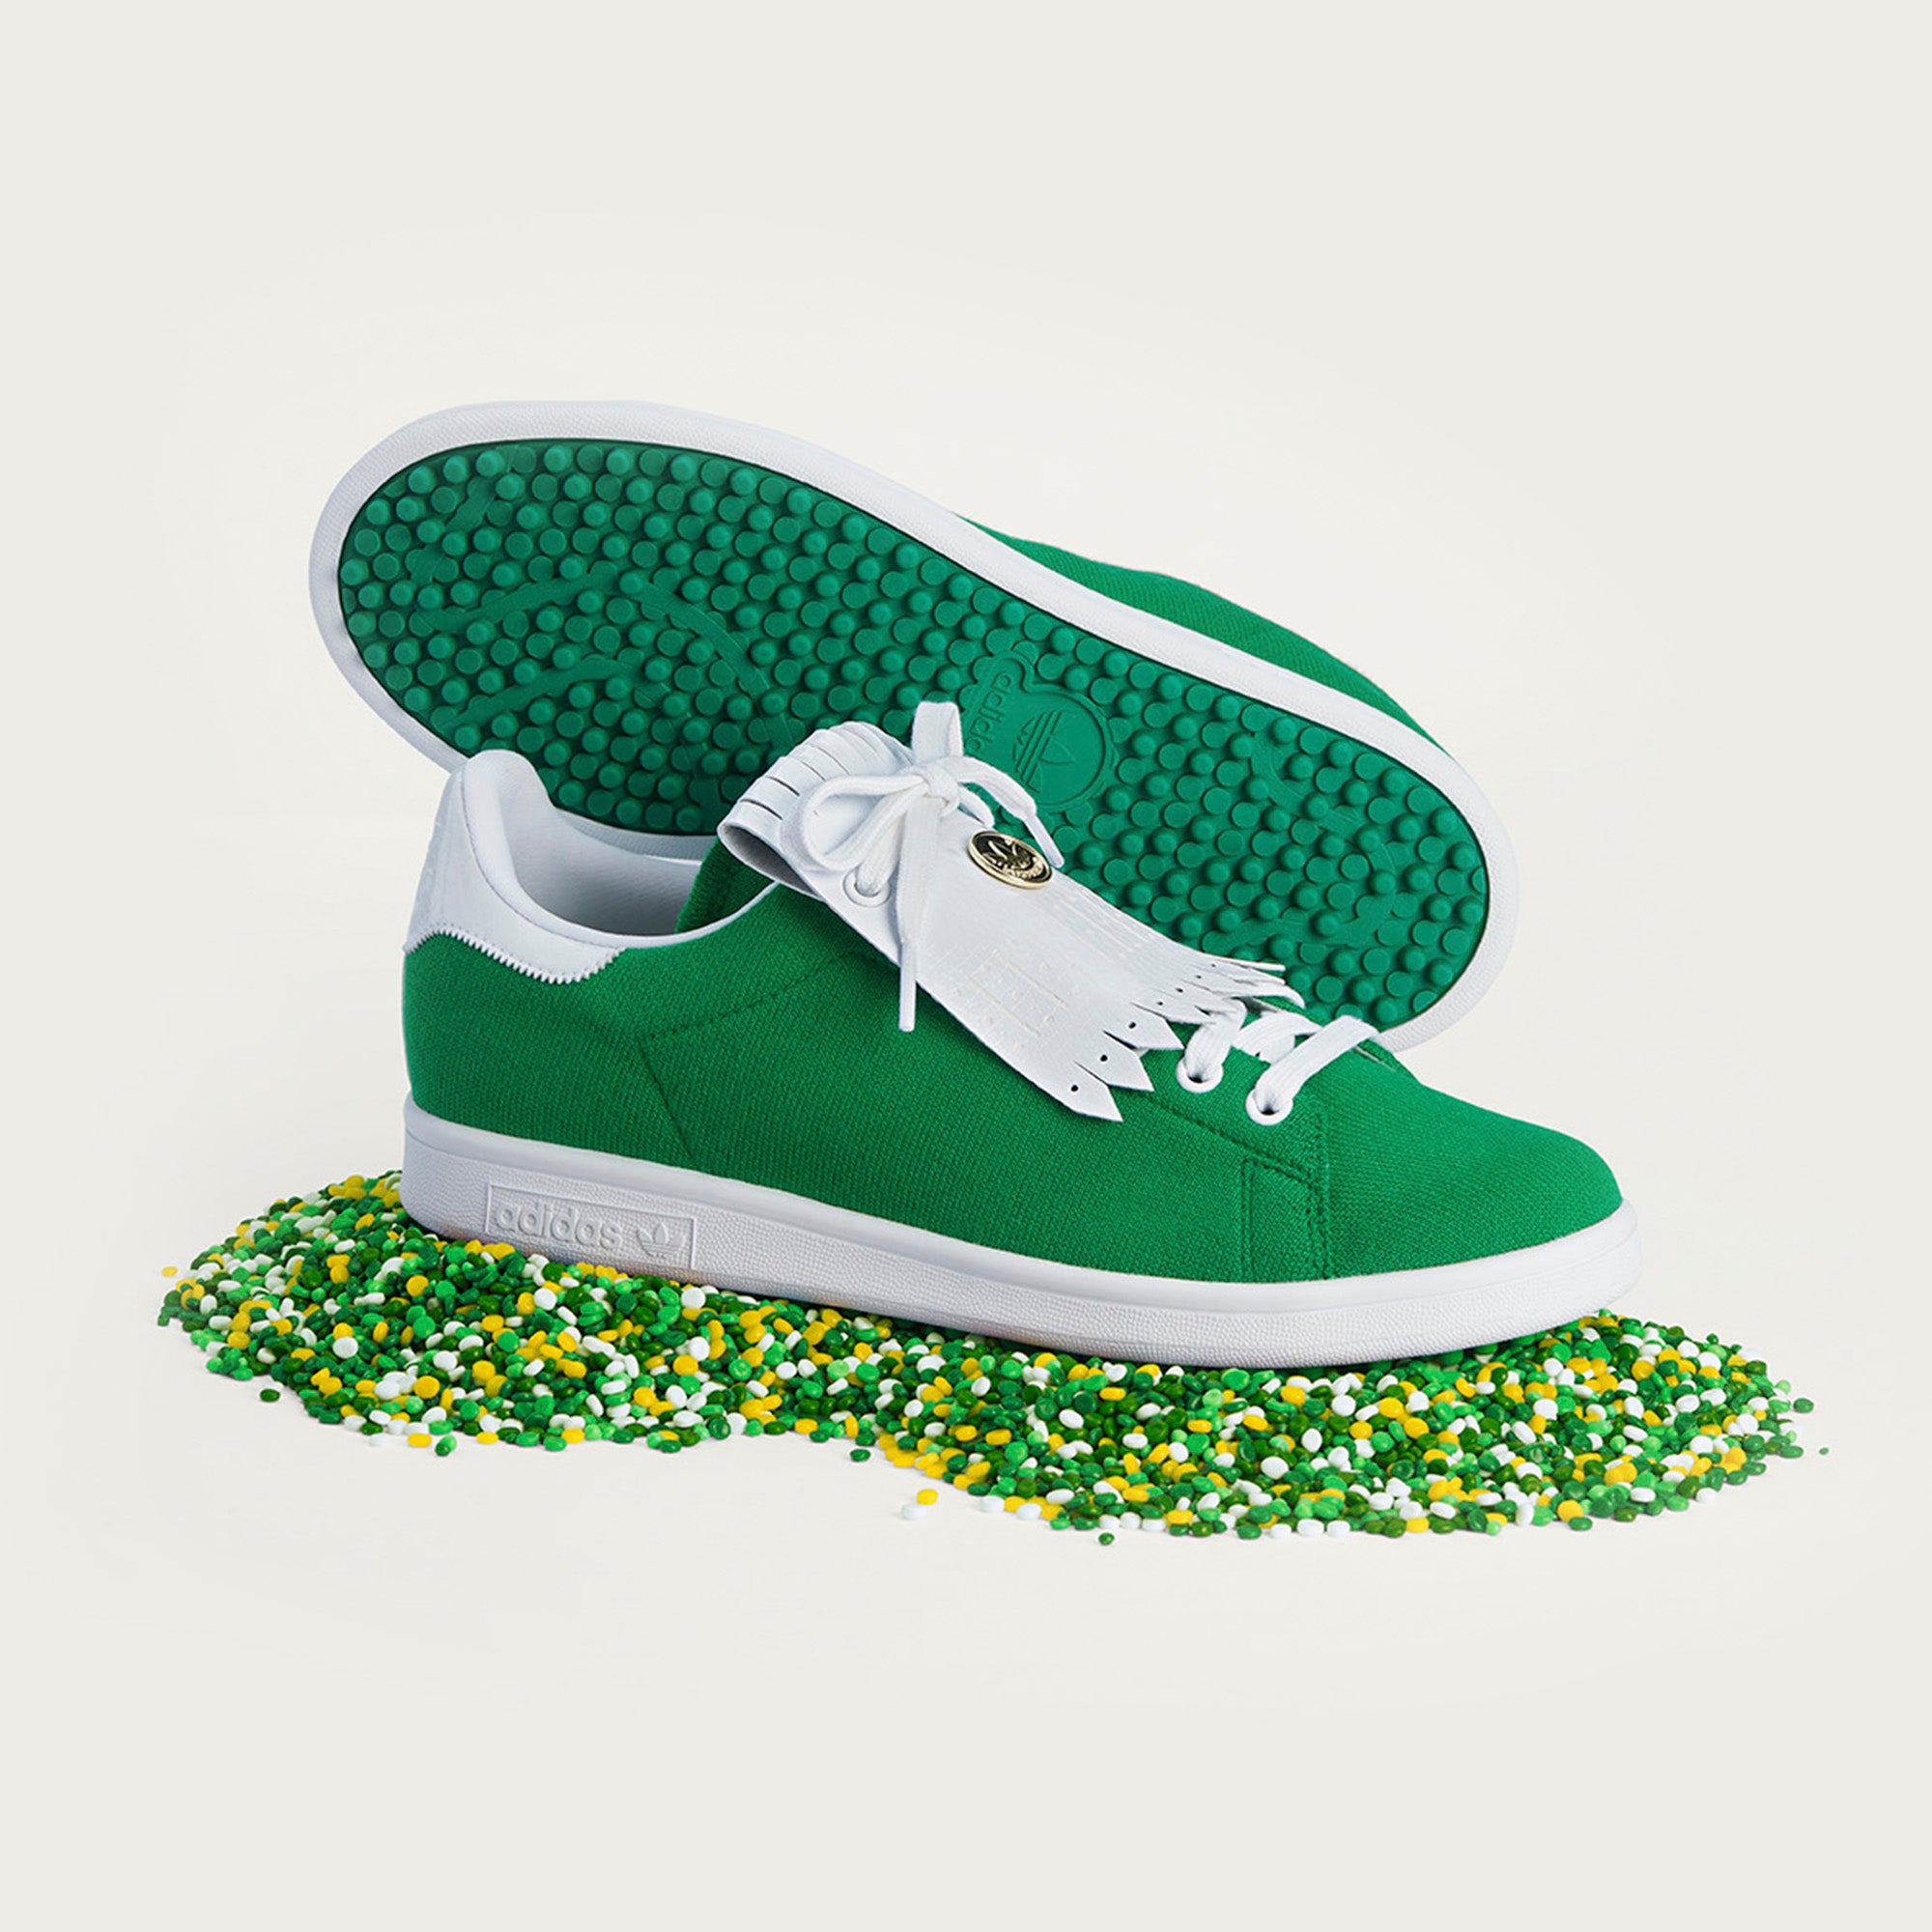 Court meets Course — Adidas Golf with Stan Smith article image